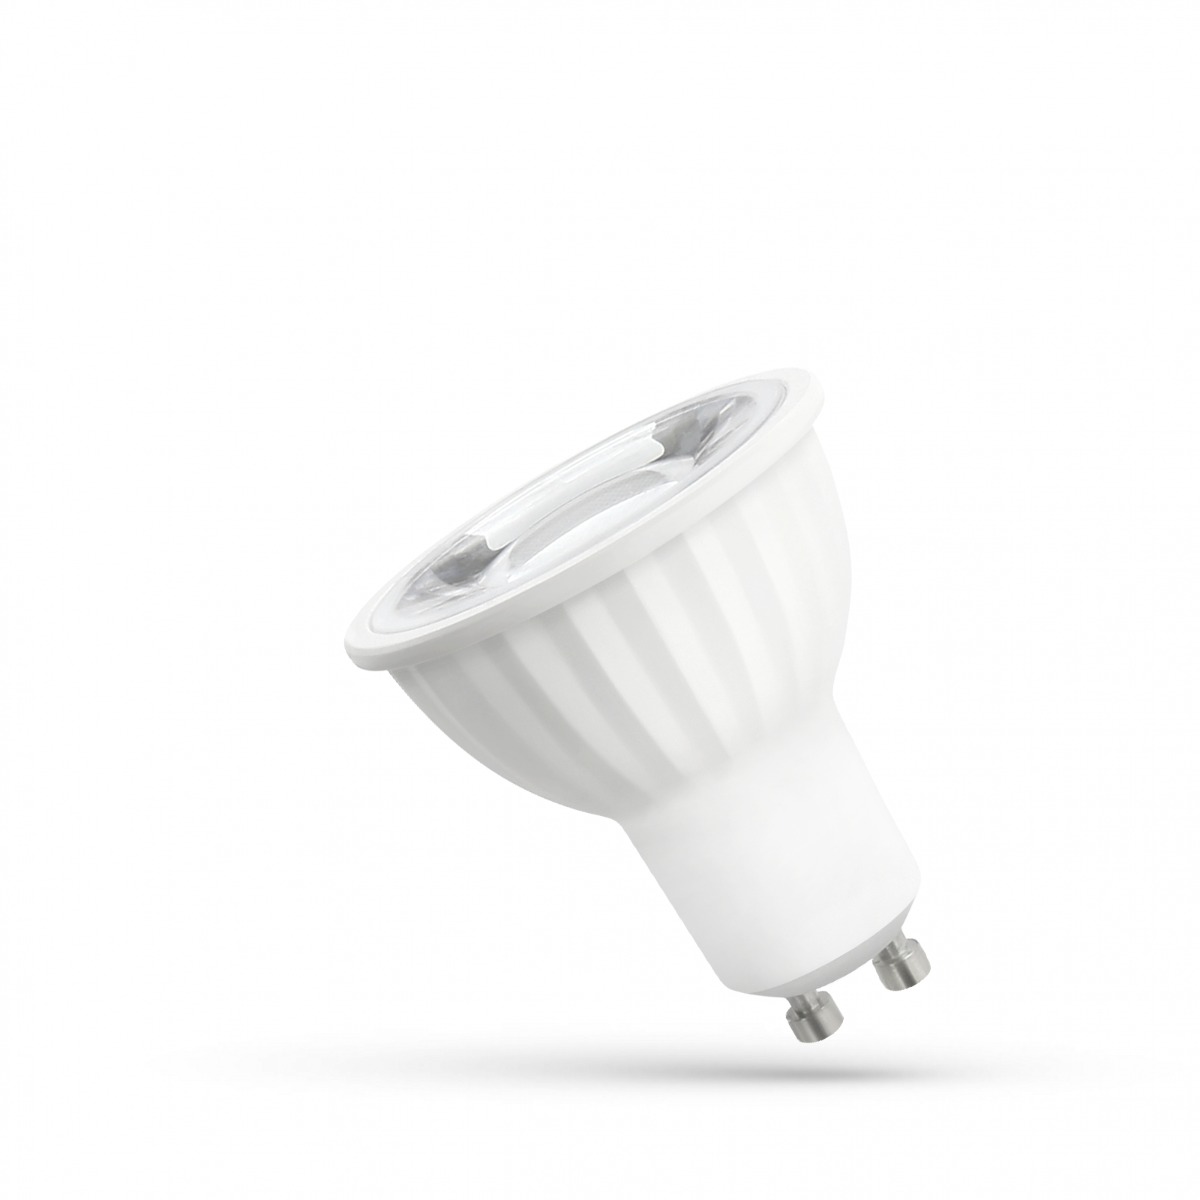 GU10 LED Light Bulb 4W with Lens 45° and SMD-Chip 